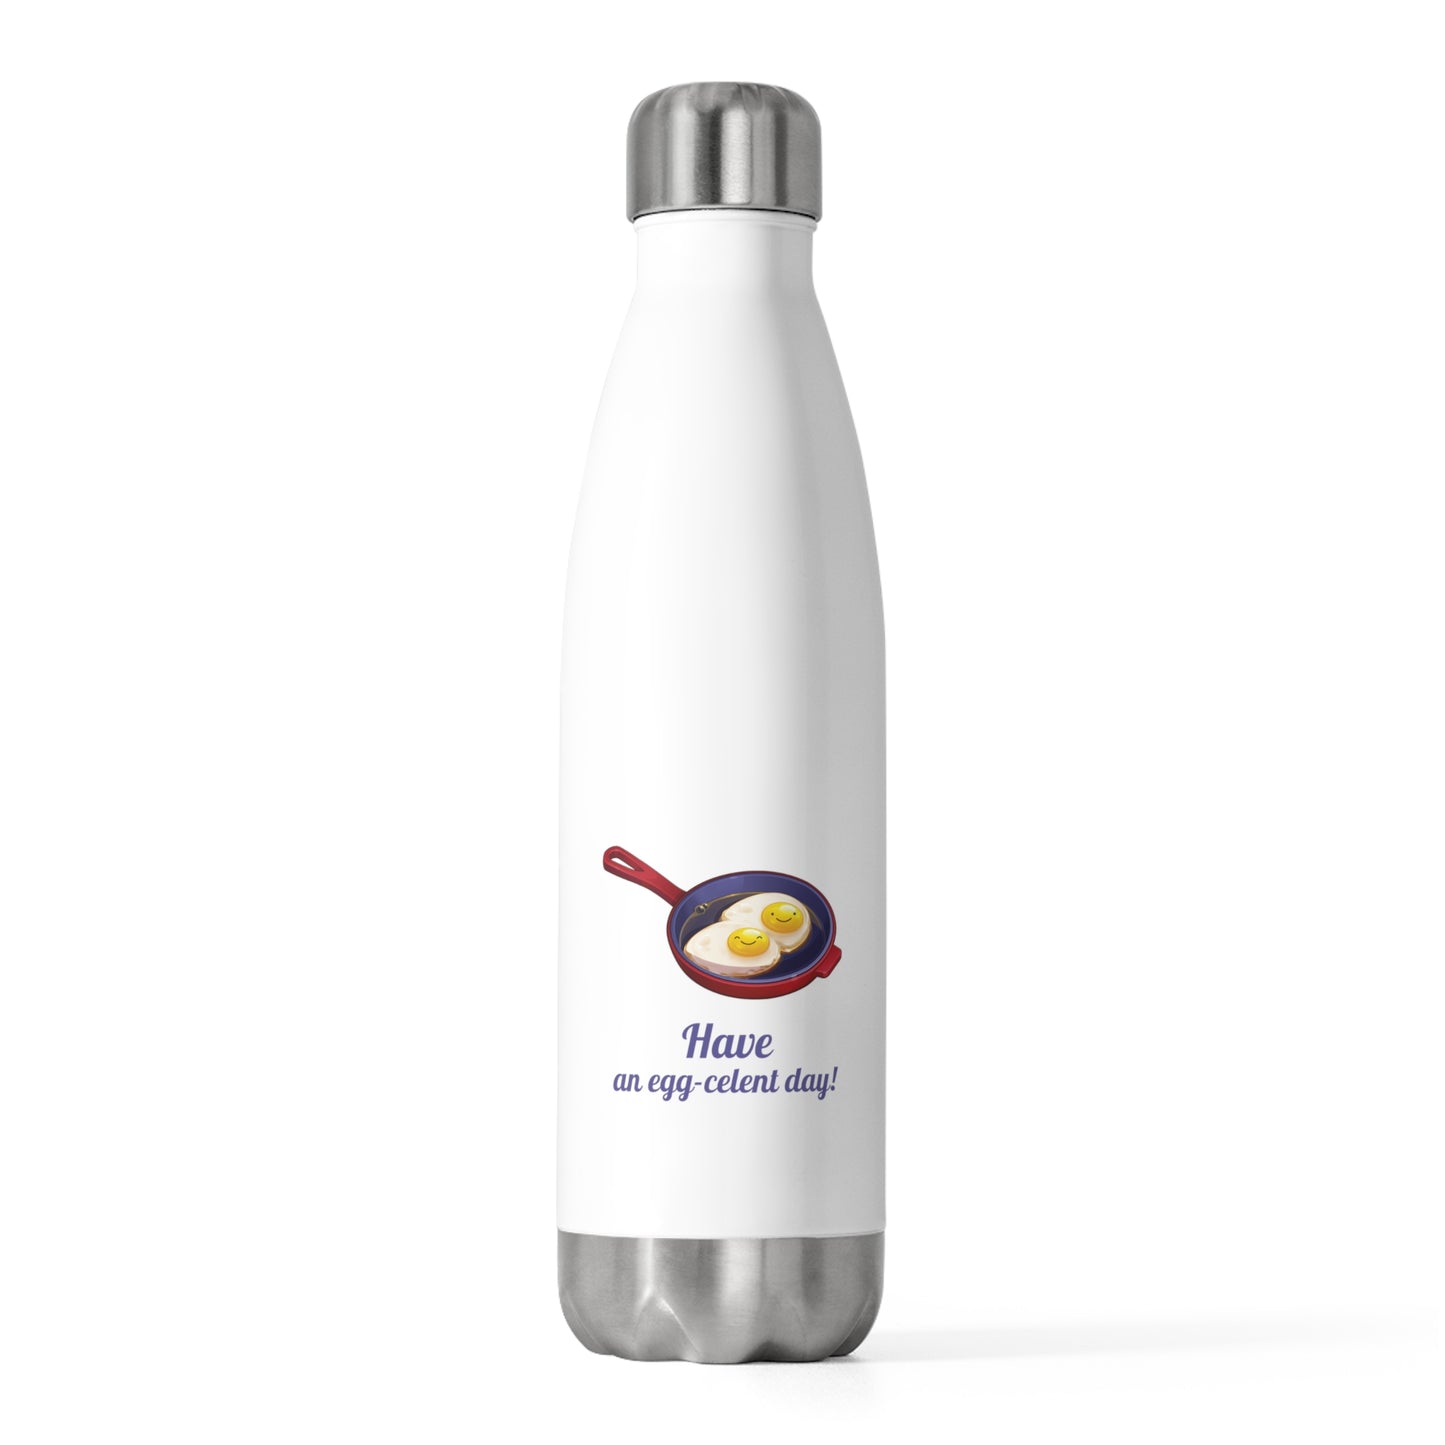 Cooking Live 20oz Insulated Bottle